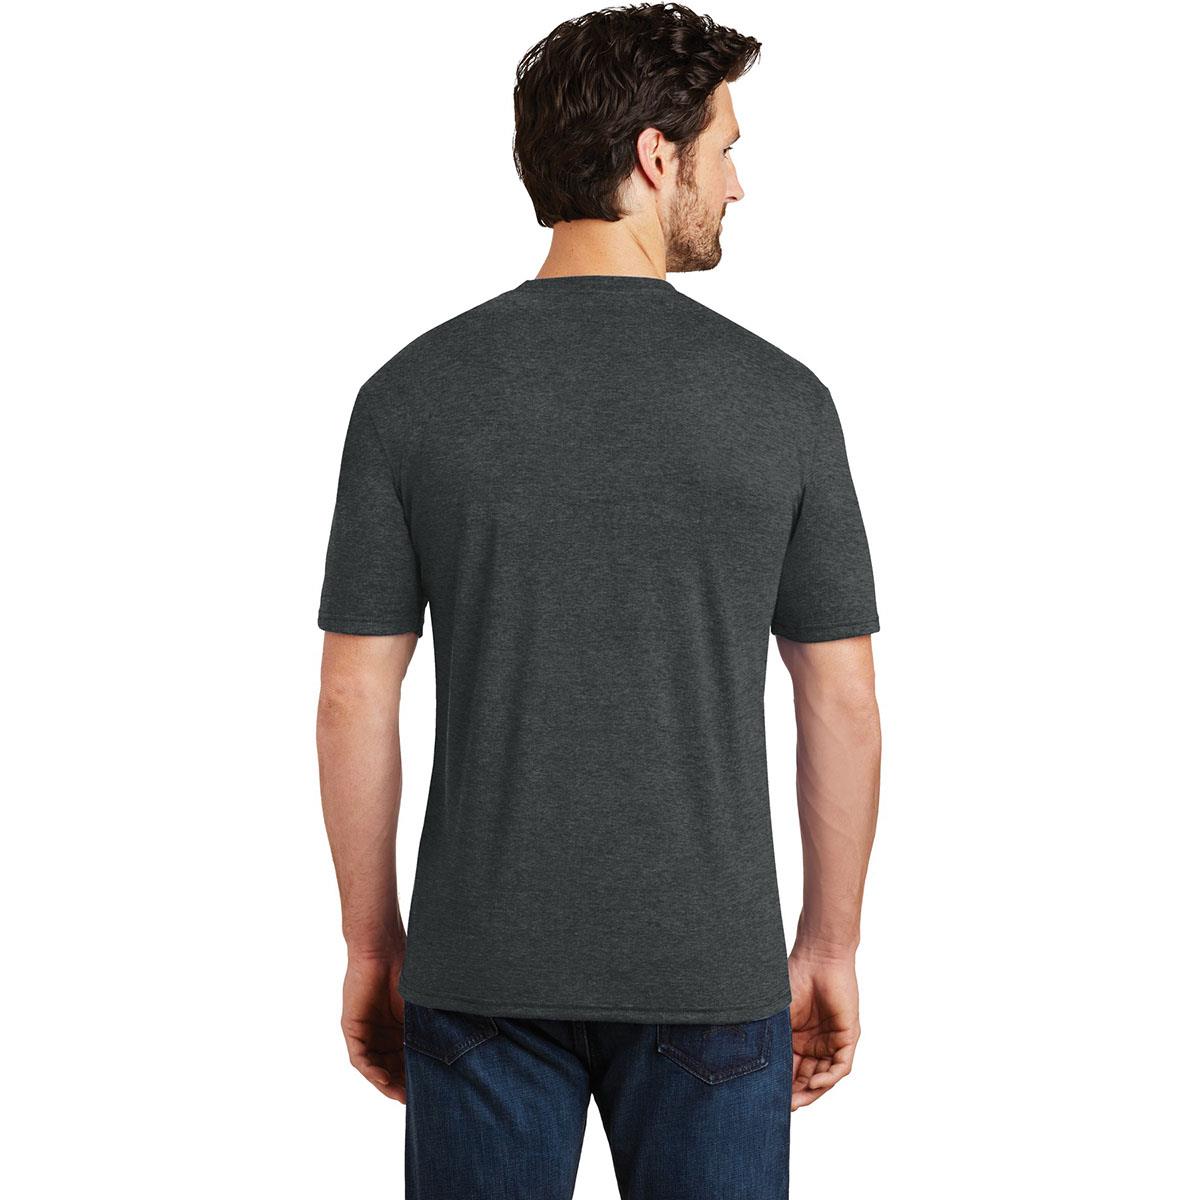 District Made DM130 Mens Perfect Tri Crew Tee - Black Frost ...